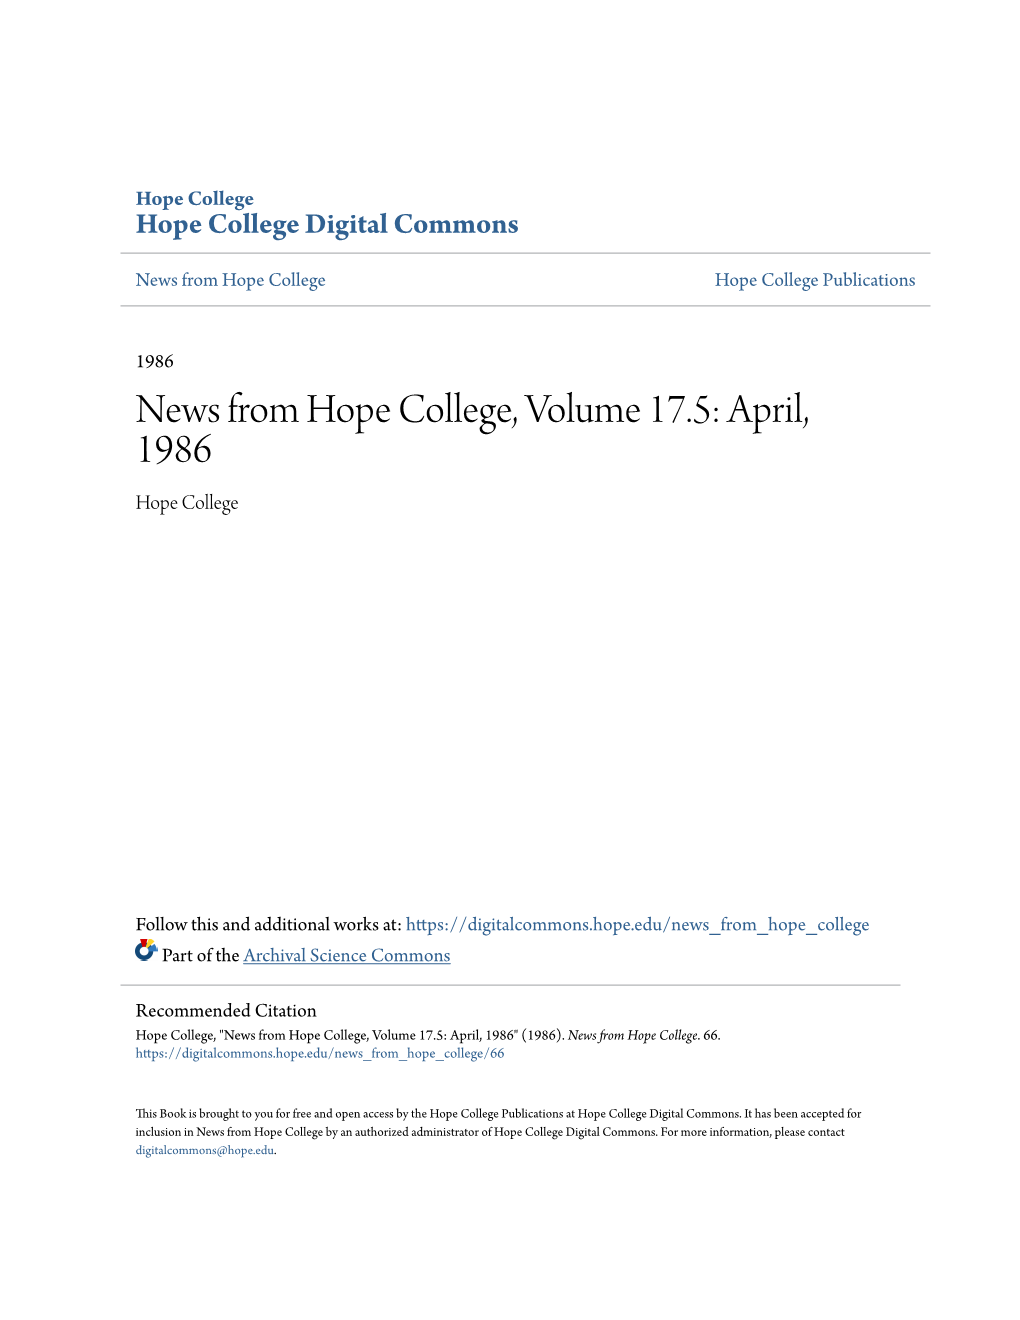 News from Hope College, Volume 17.5: April, 1986 Hope College